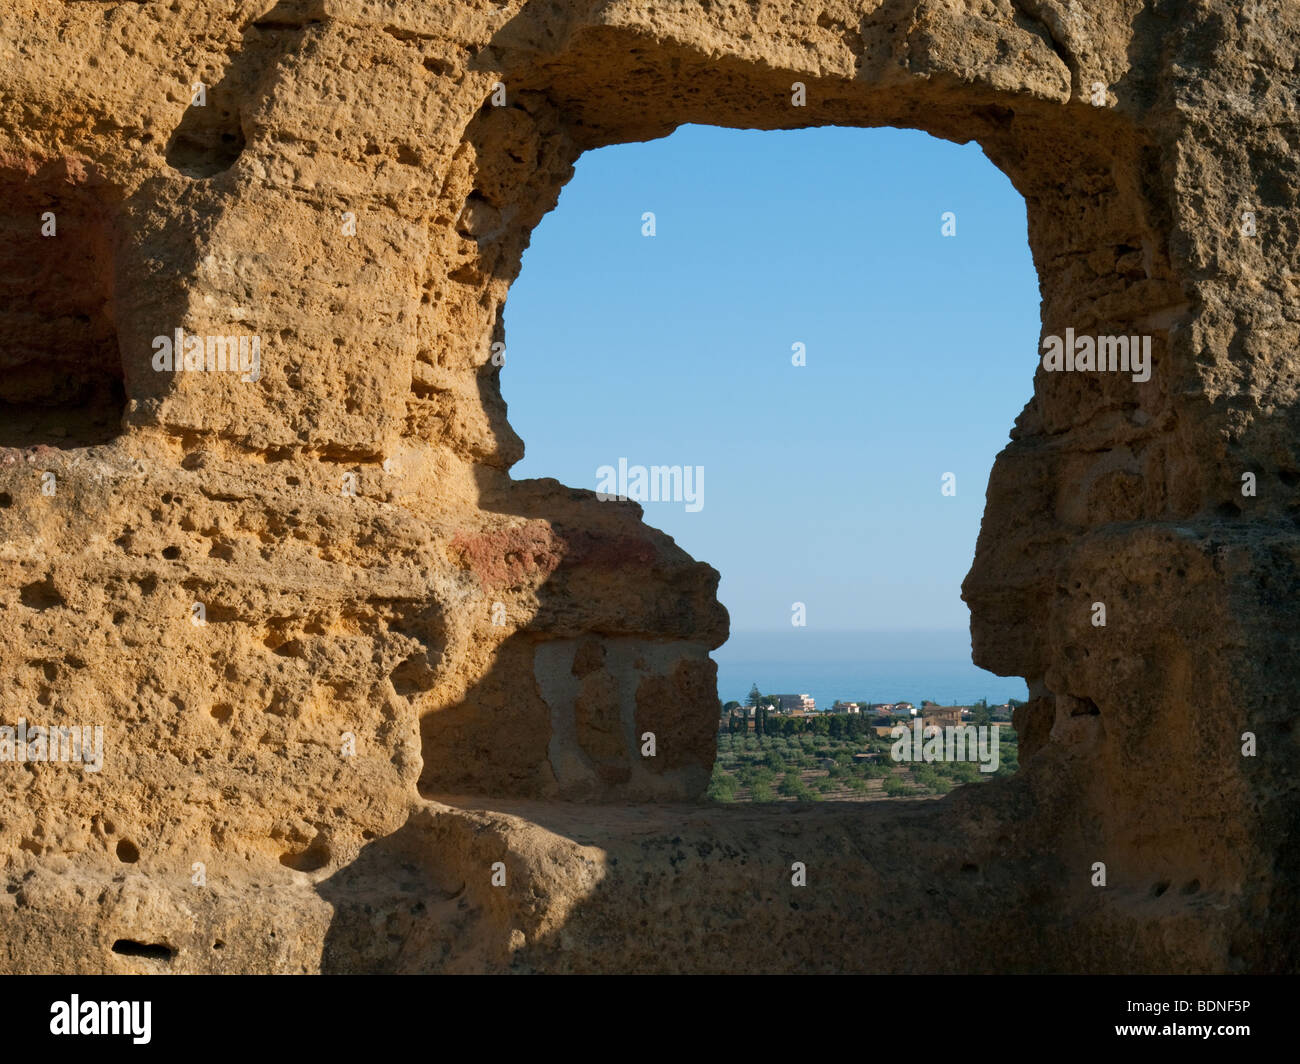 A view of the Mediterranean Sea through the opening of a tomb in the Paleo-Christian necropolis of Agrigento, Sicily. Stock Photo